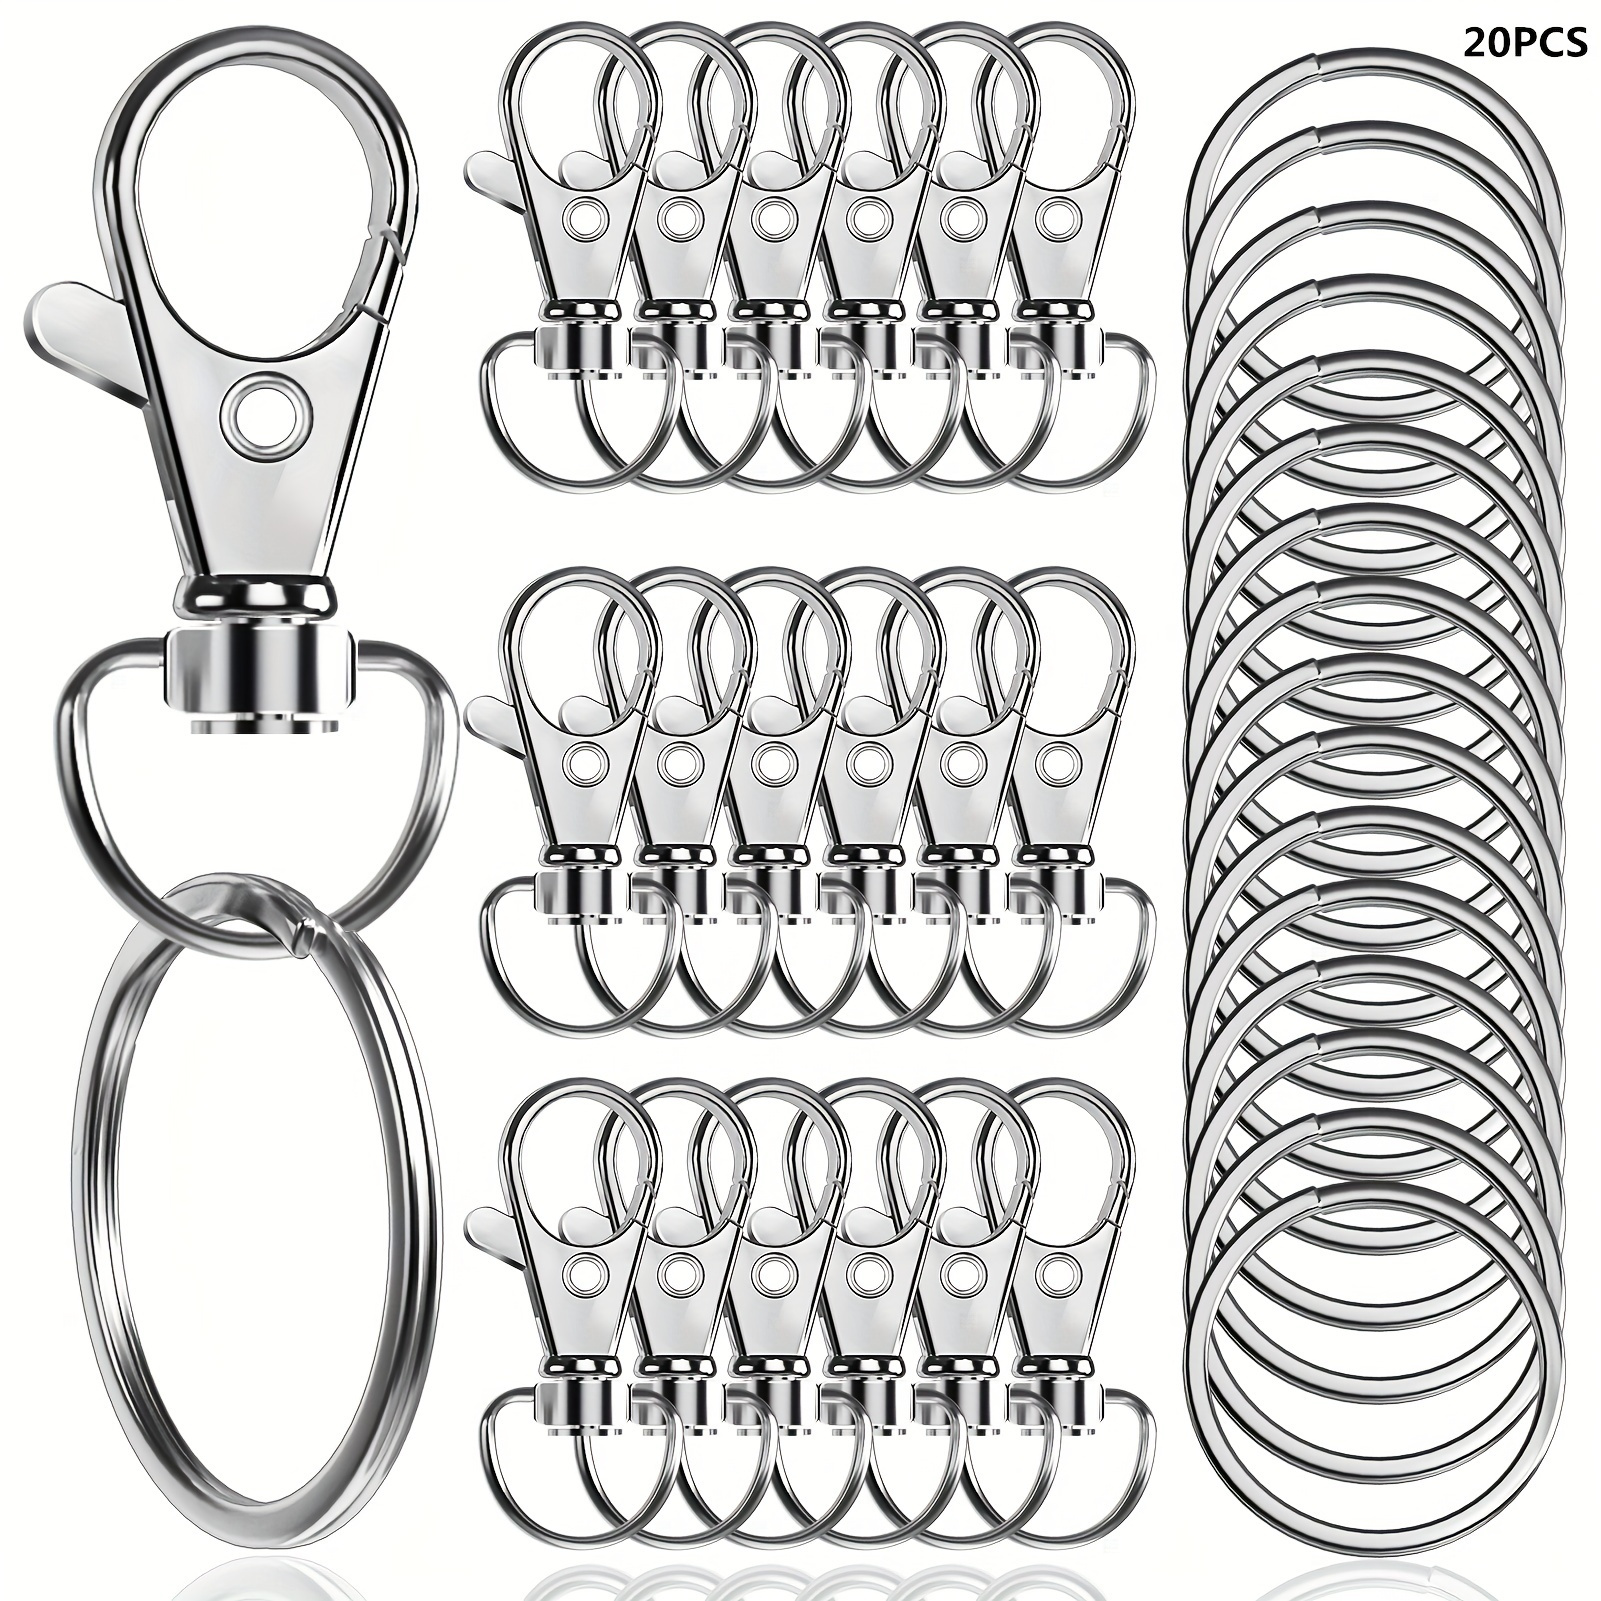 

20 Pcs Rotating Lobster Clasp With Key Ring, 10pcs Key Chain 10pcs Key Ring Jewelry, Diy Crafts For Men And Women, Valentine's Day Gifts, 1.25inches/32mm (10 Pcs Lanyard Snap Hooks+10 Pcs Key Rings)